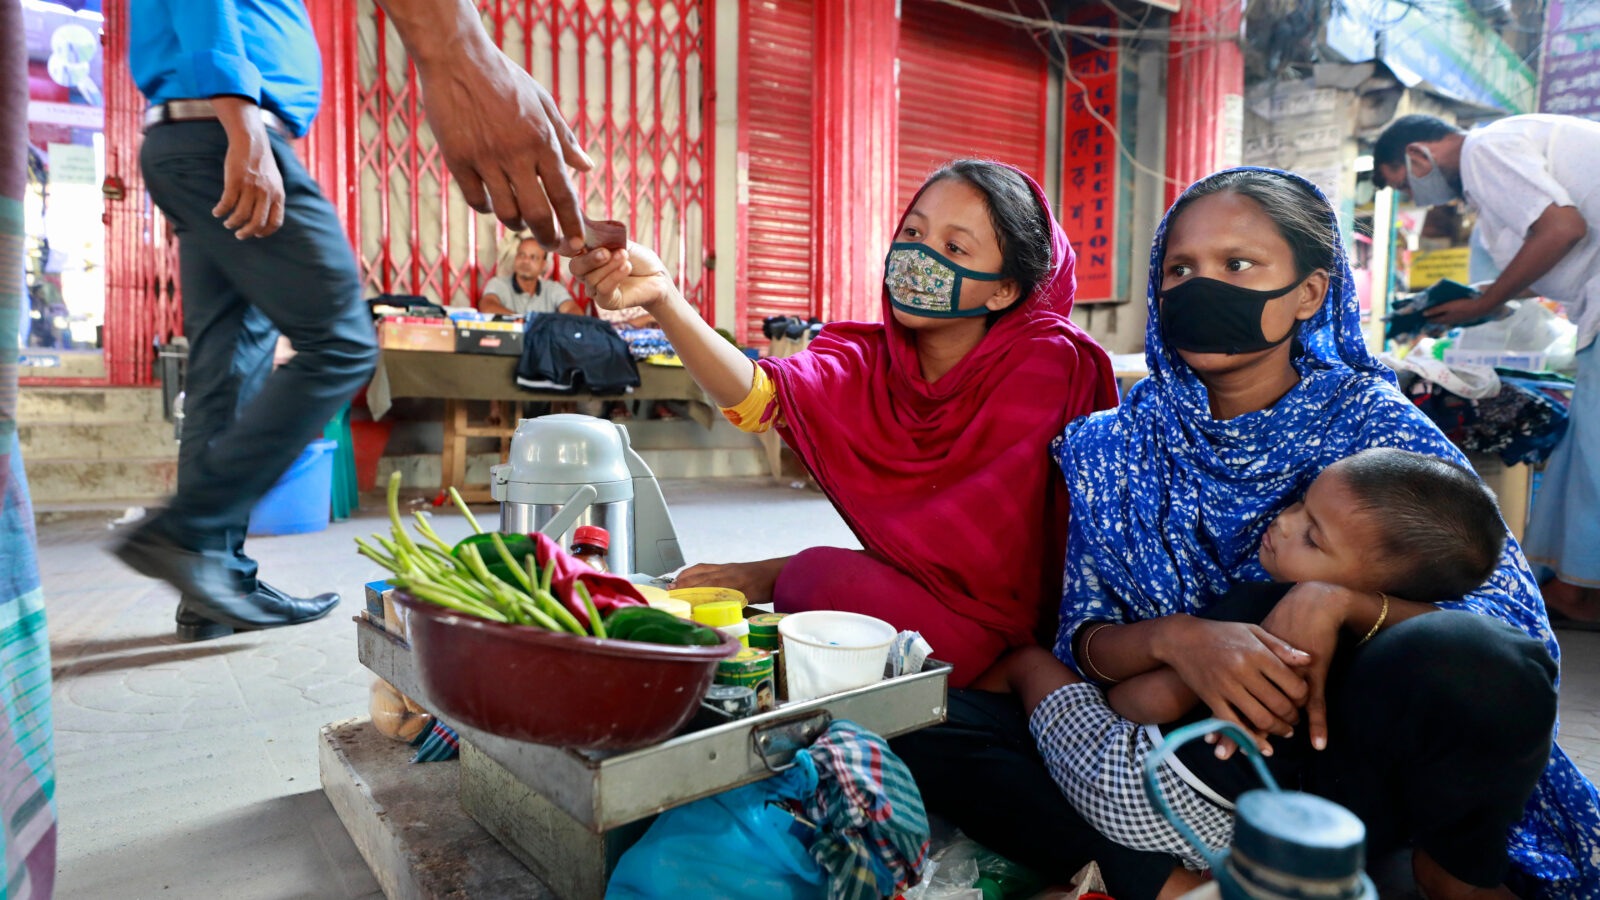 Women in Bangladesh working while caring for their children